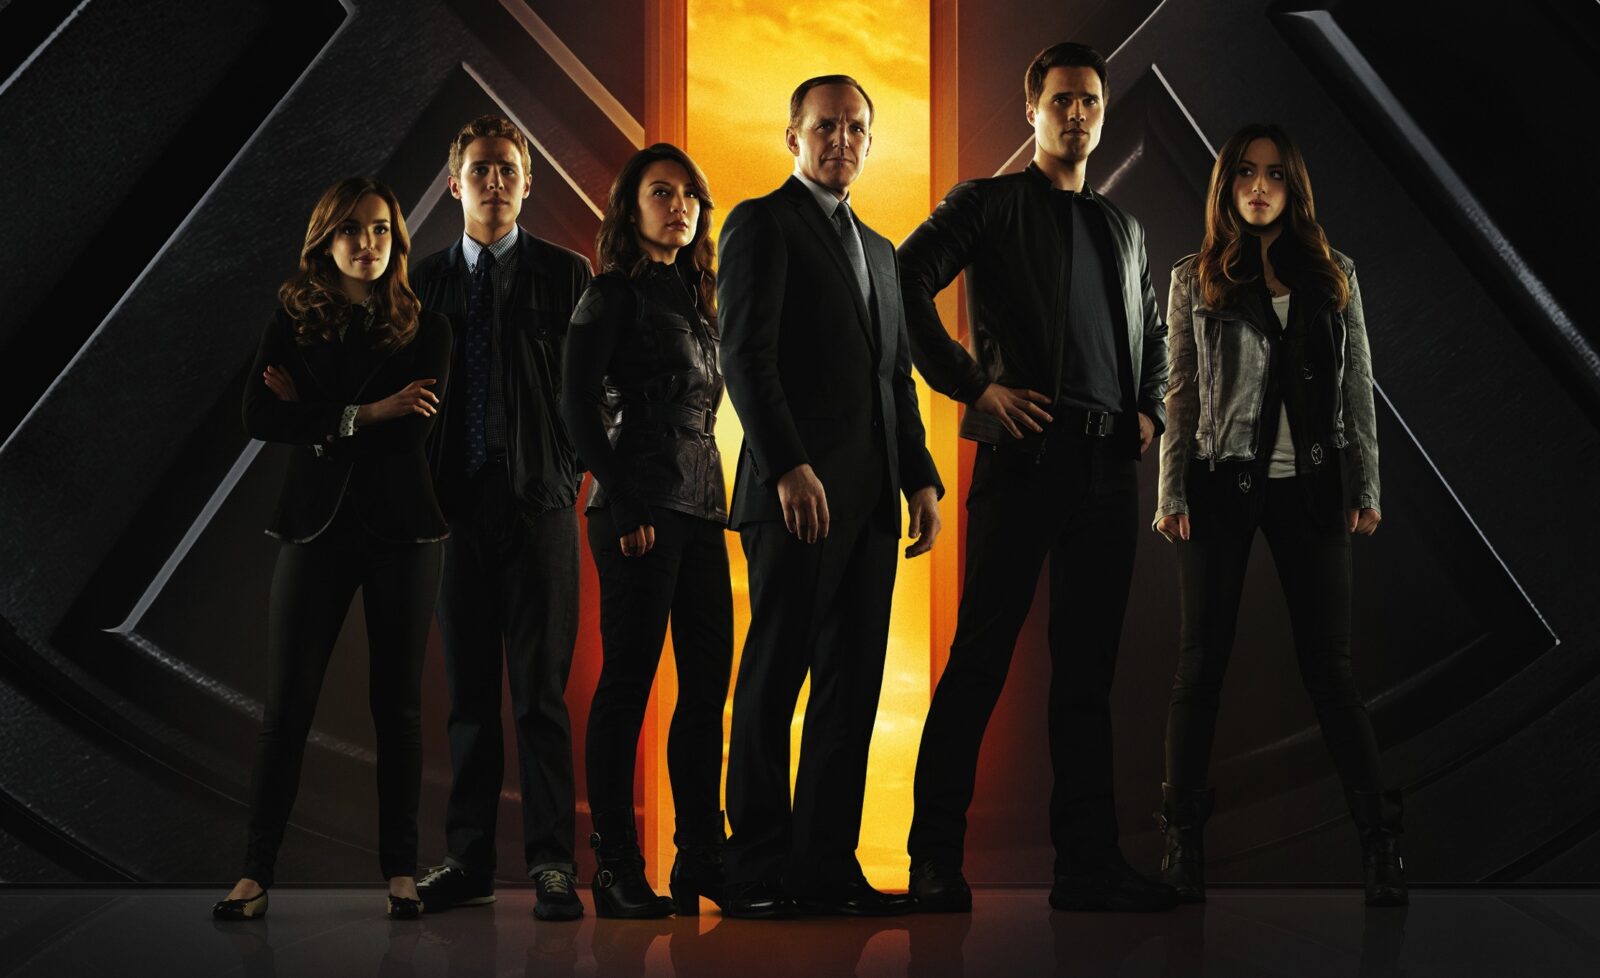 AGENTS OF S.H.I.E.L.D., Episode 1 [Review]: Easter comes early.